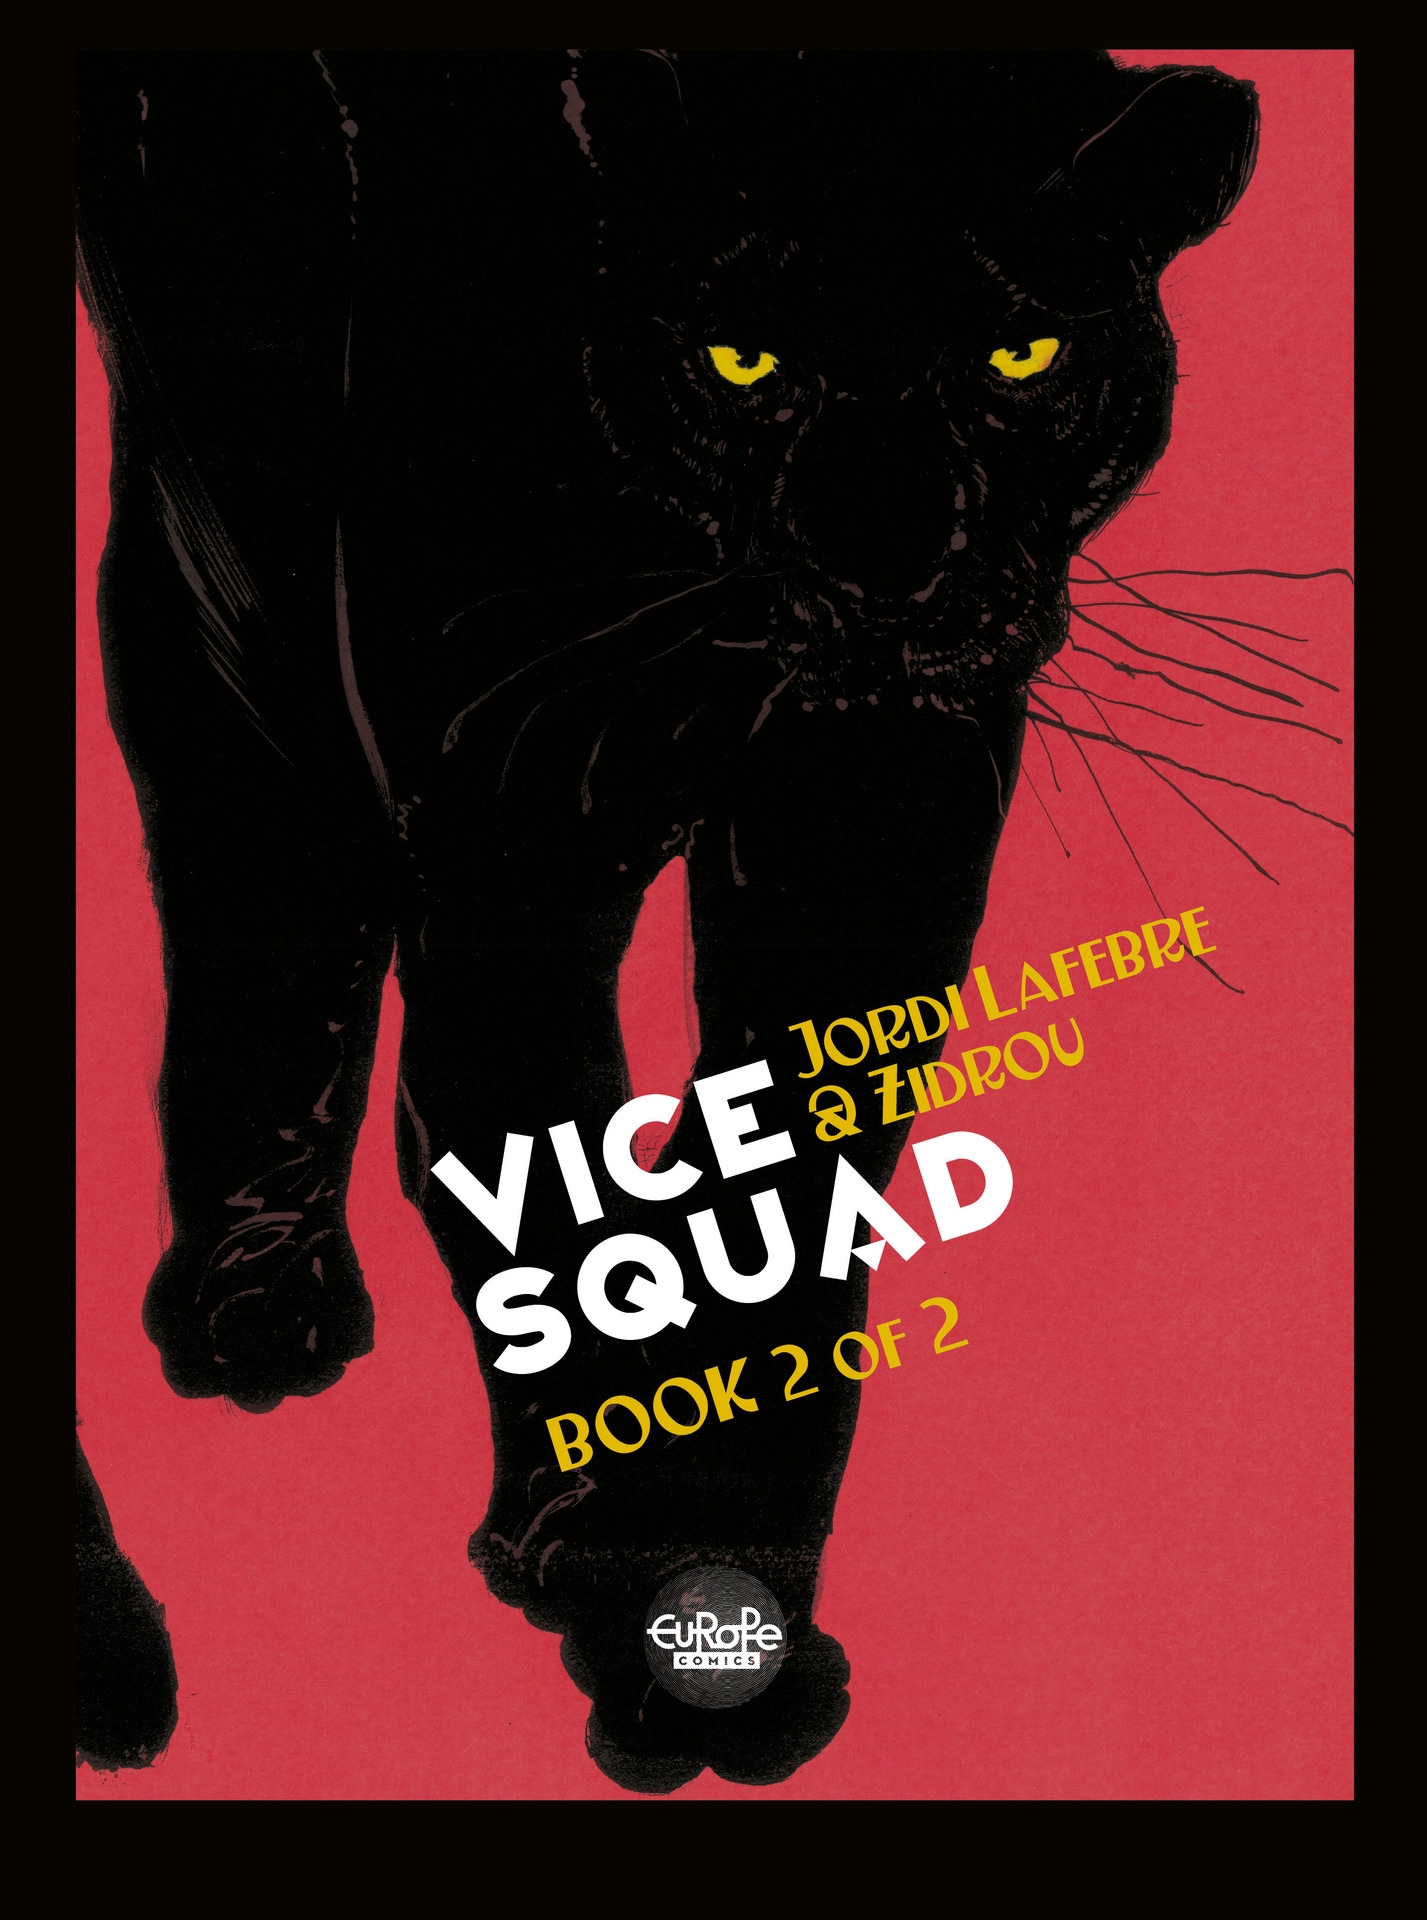 Read online Vice Squad comic -  Issue #2 - 1